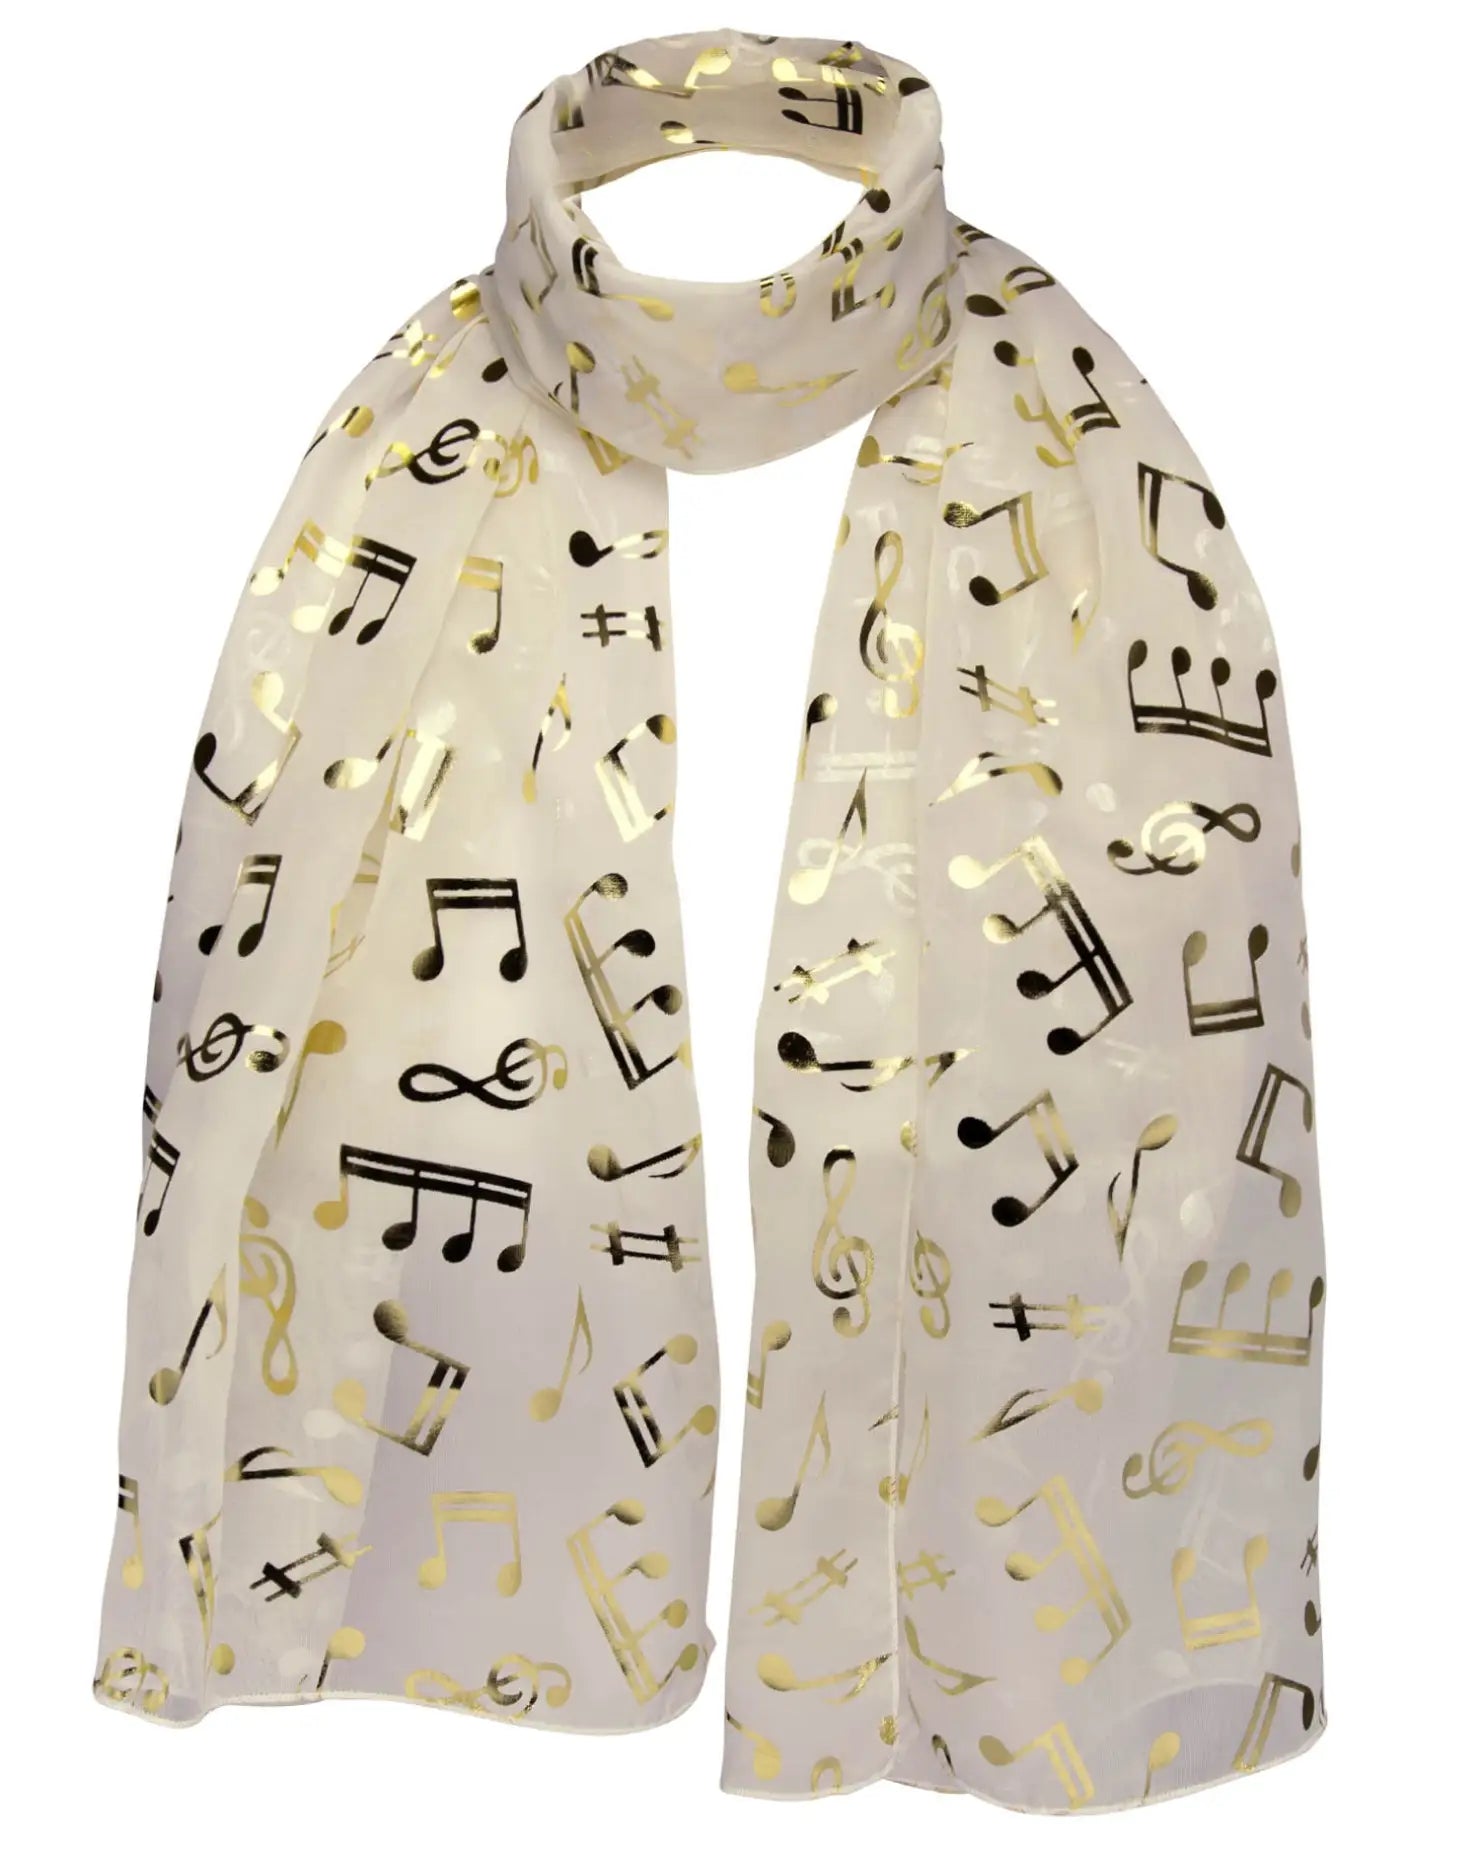 Gold foil music note chiffon group scarf with musical notes on white fabric.